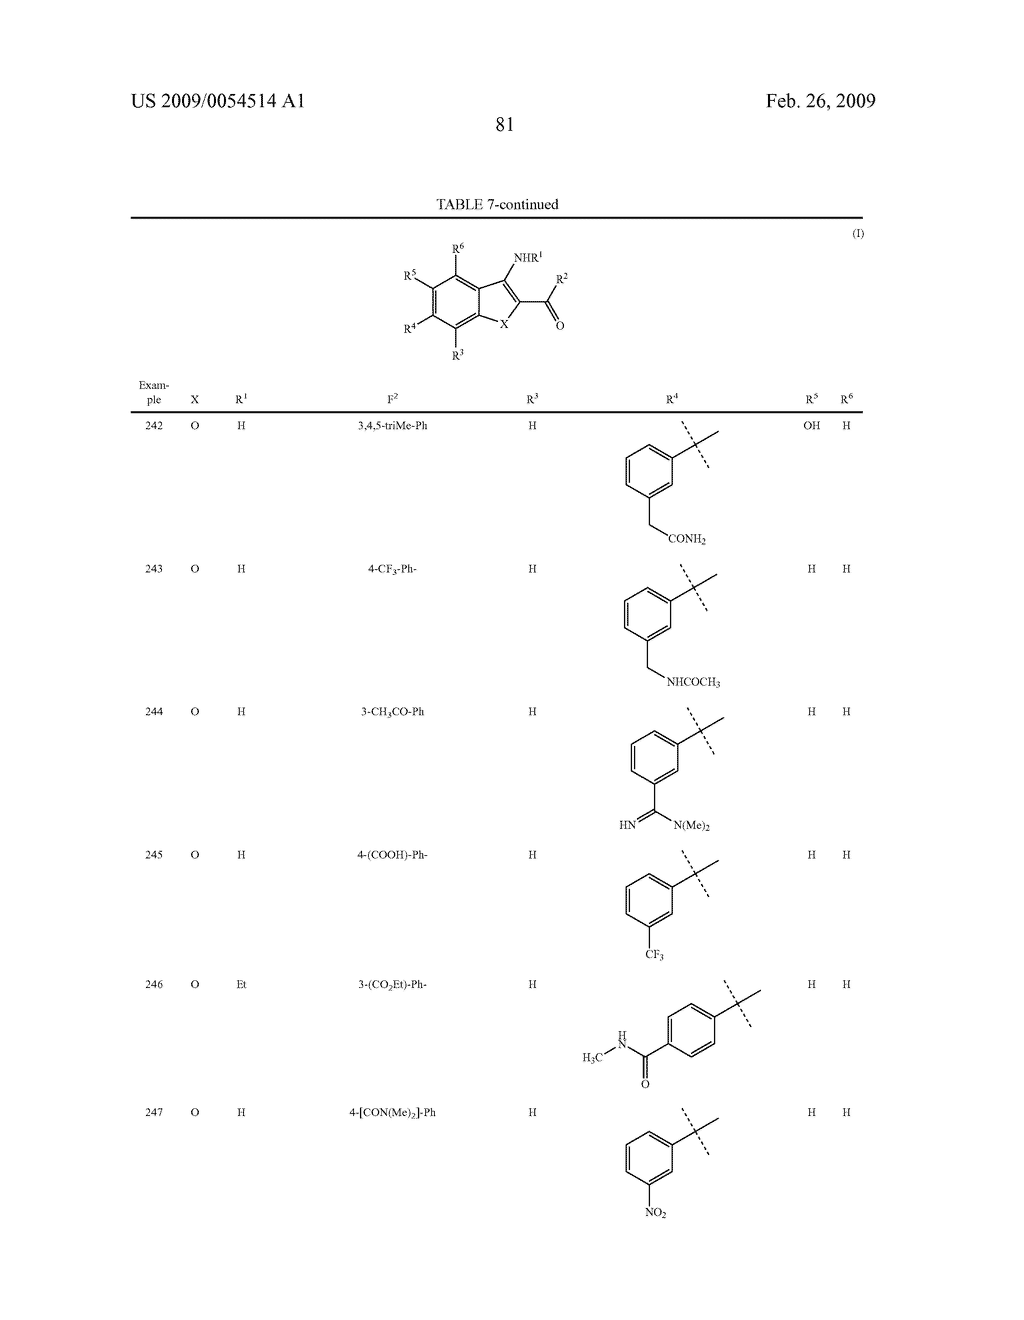 BENZOFURAN AND BENZOTHIOPHENE DERIVATIVES USEFUL IN THE TREATMENT OF HYPER-PROLIFERATIVE DISORDERS - diagram, schematic, and image 82